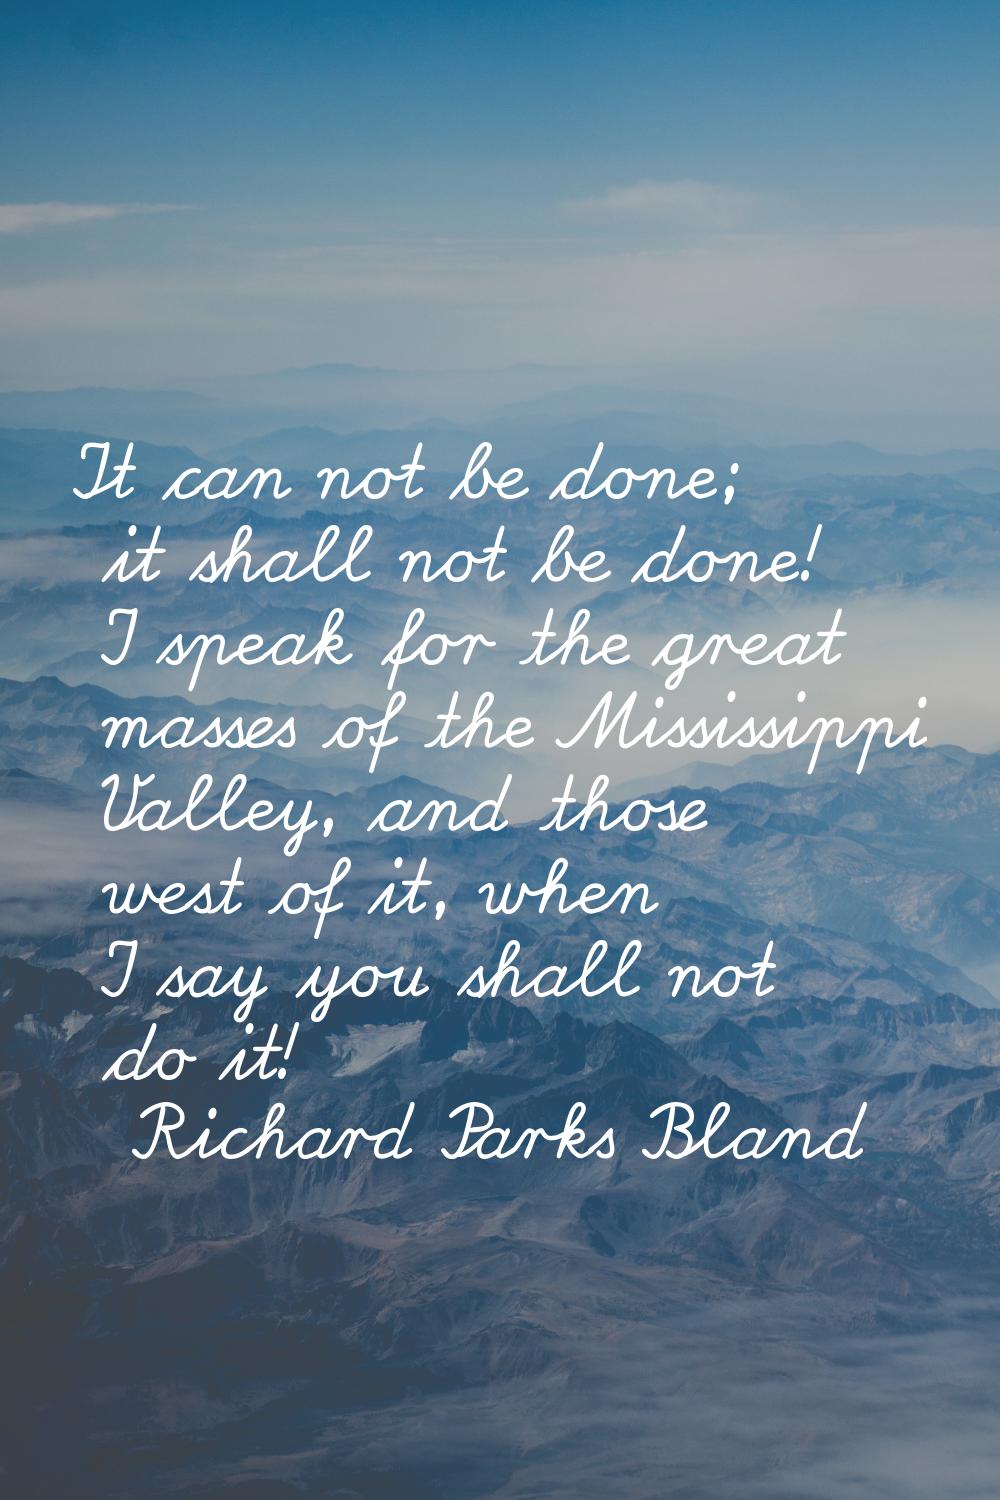 It can not be done; it shall not be done! I speak for the great masses of the Mississippi Valley, a